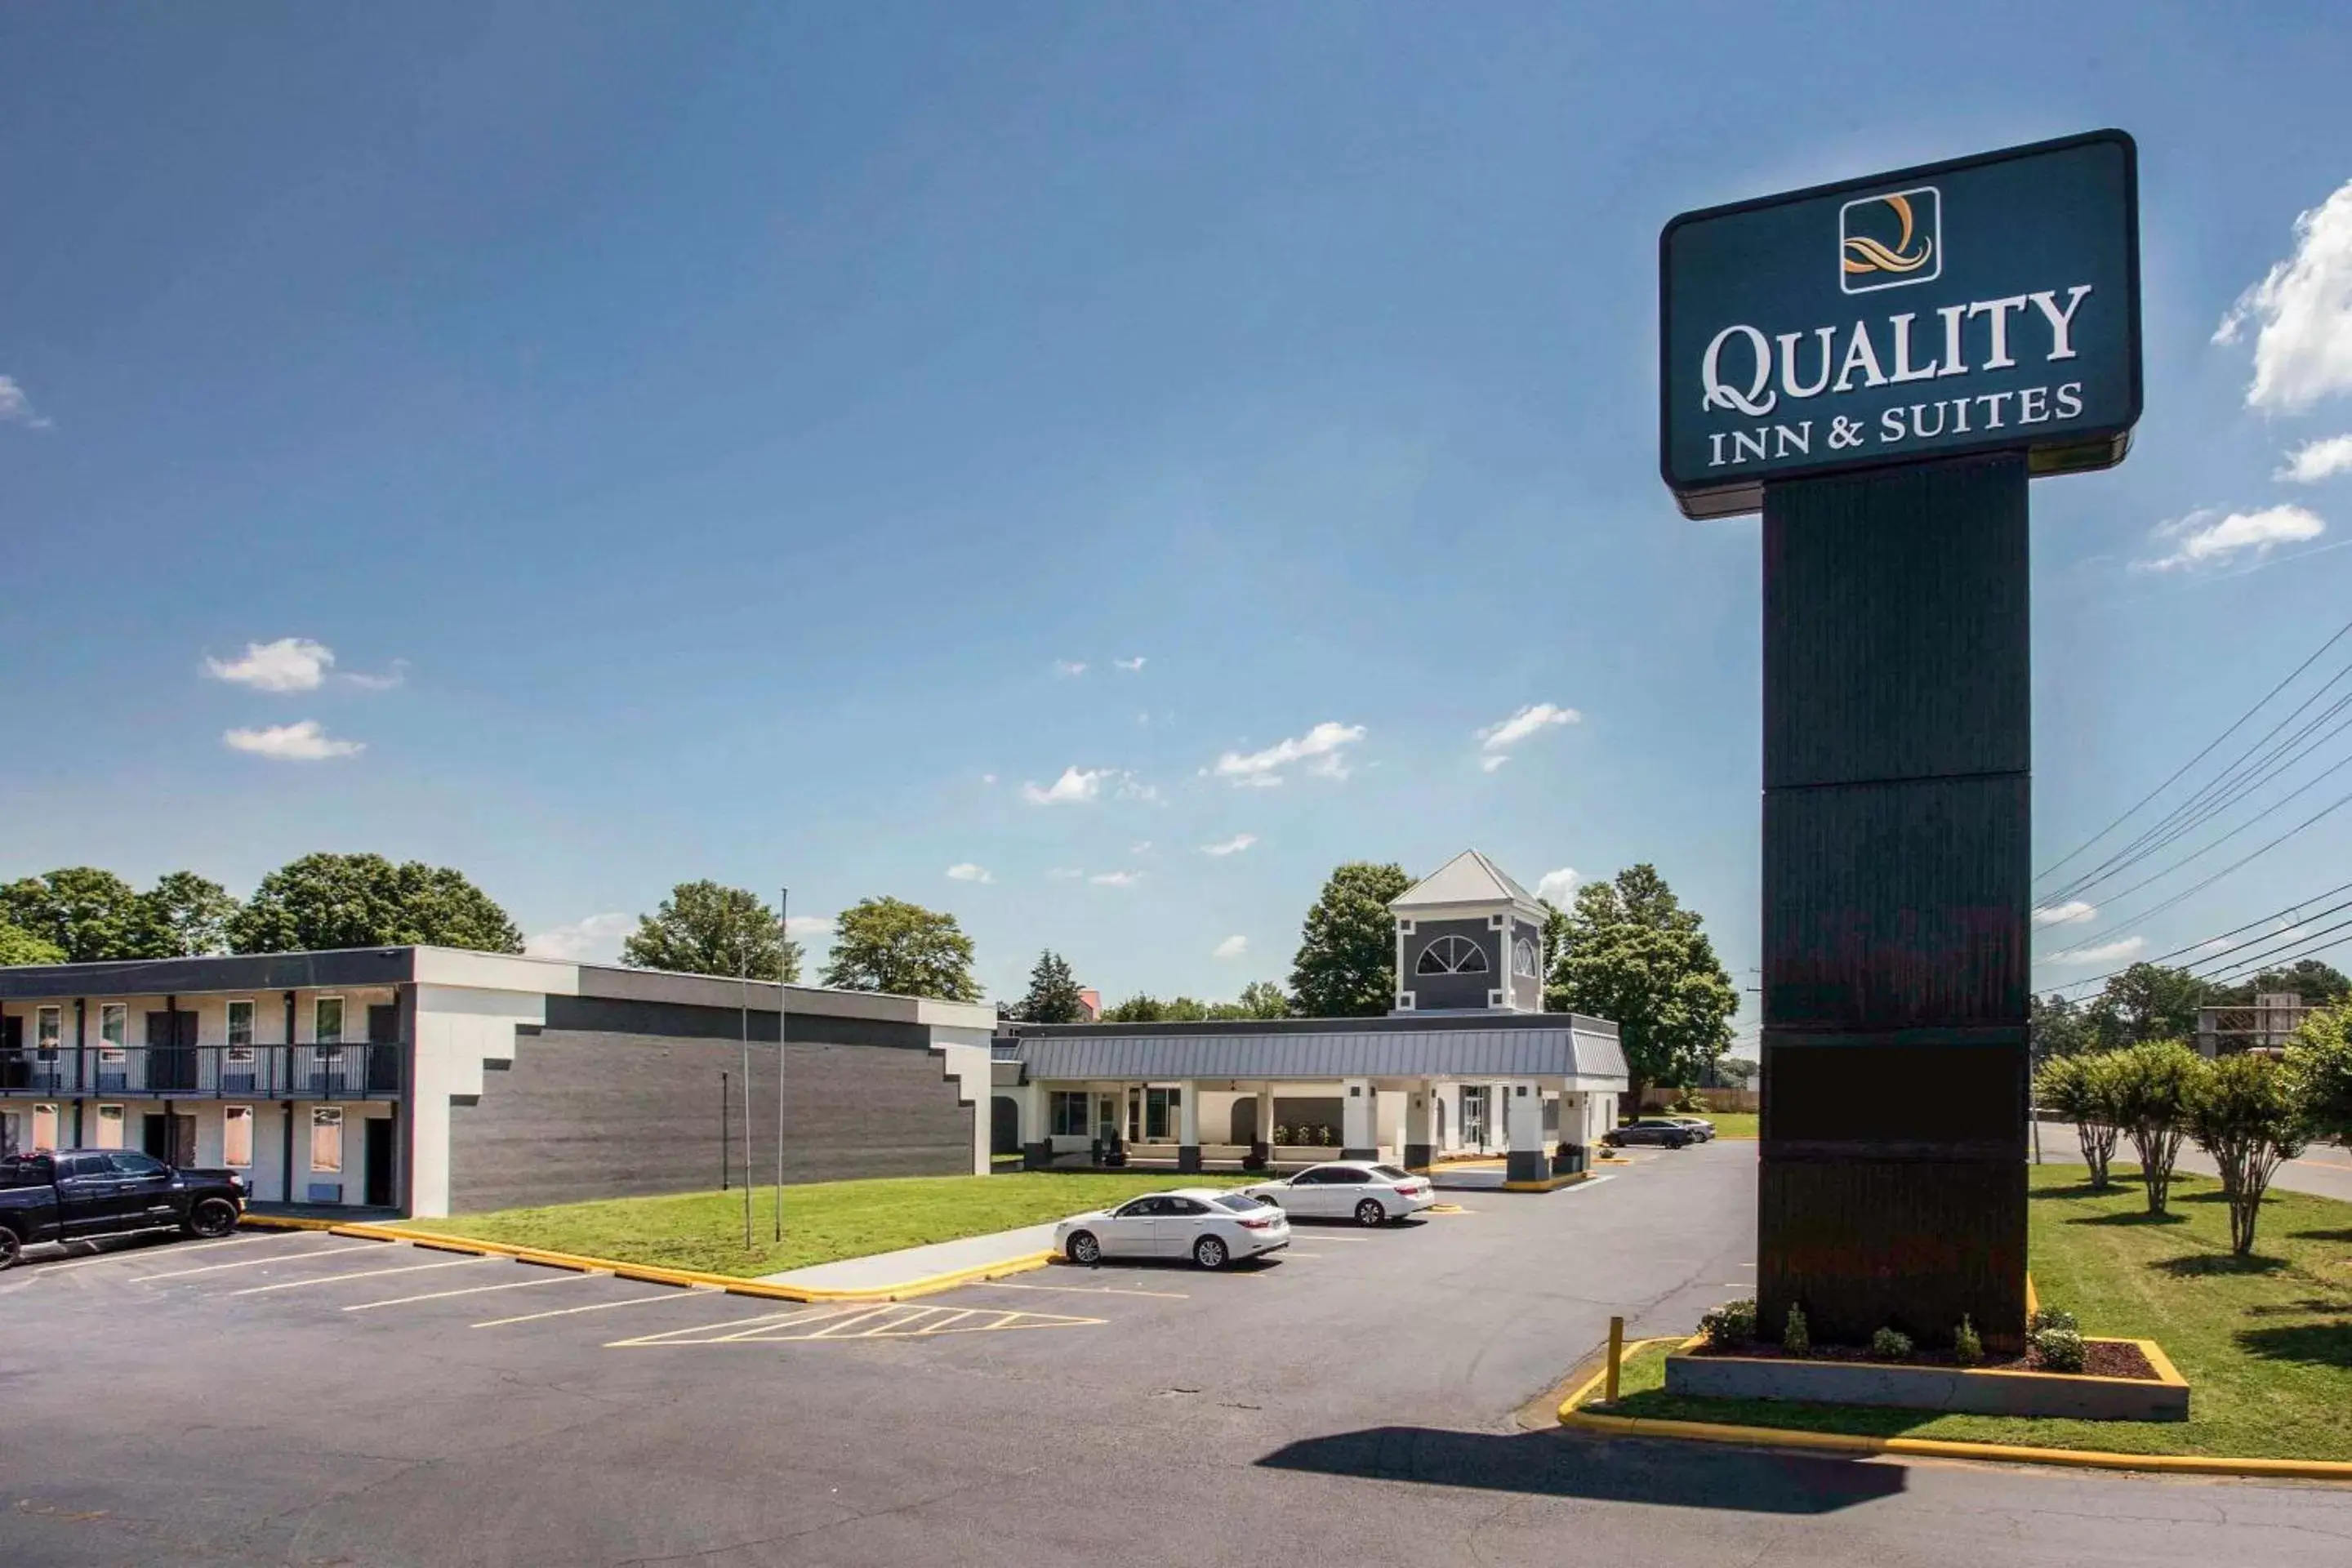 Property Building in Quality Inn & Suites University Area